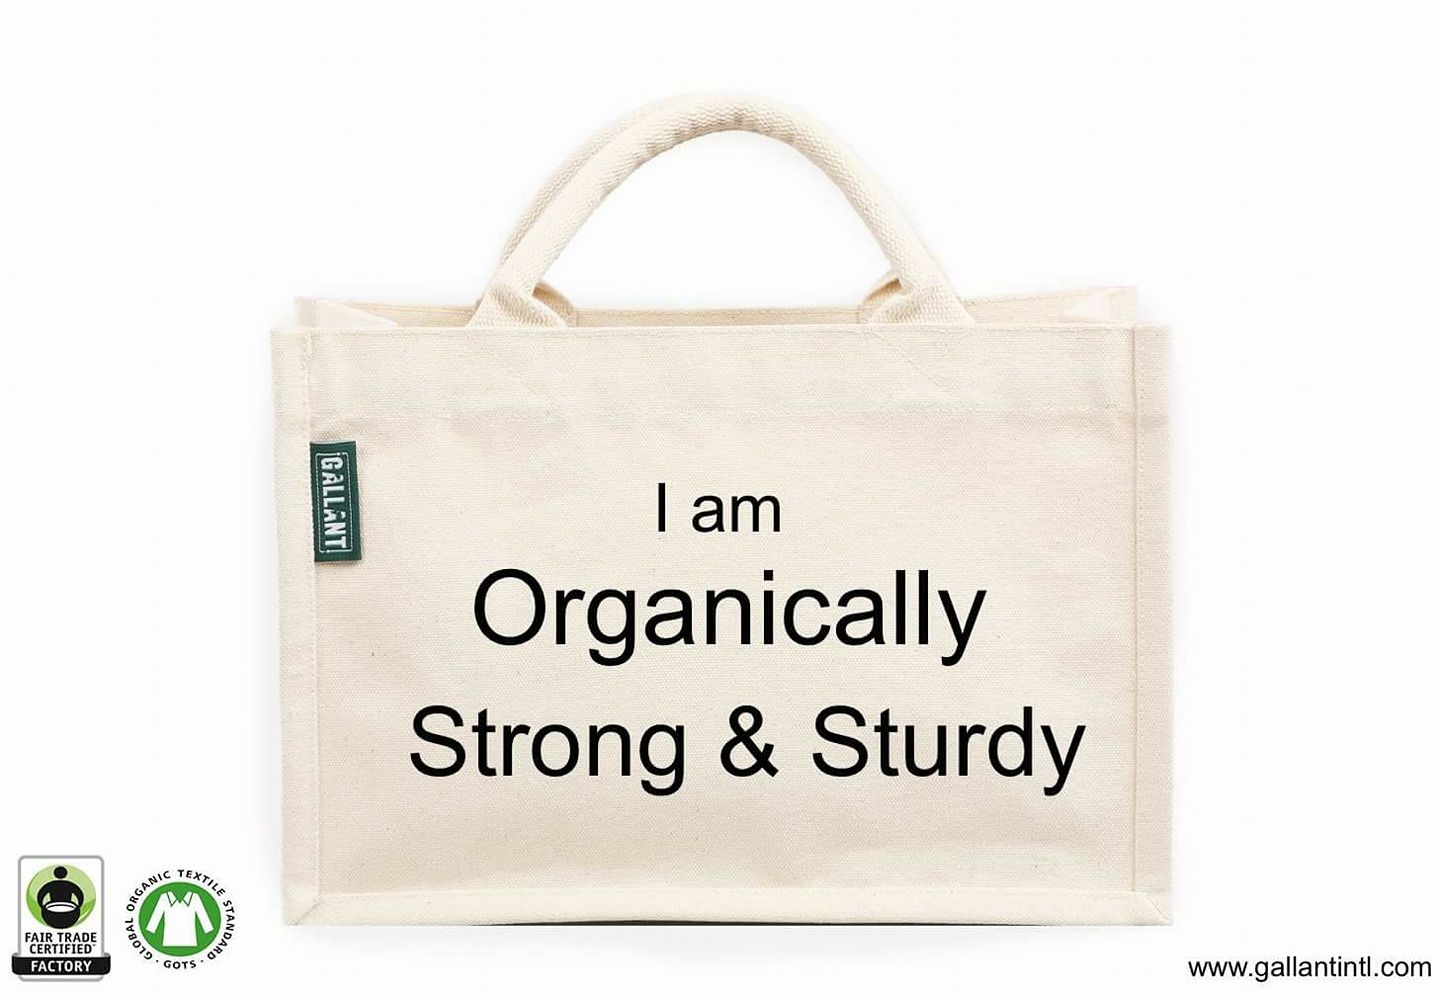 Five reasons to use organic cotton totes for your brand